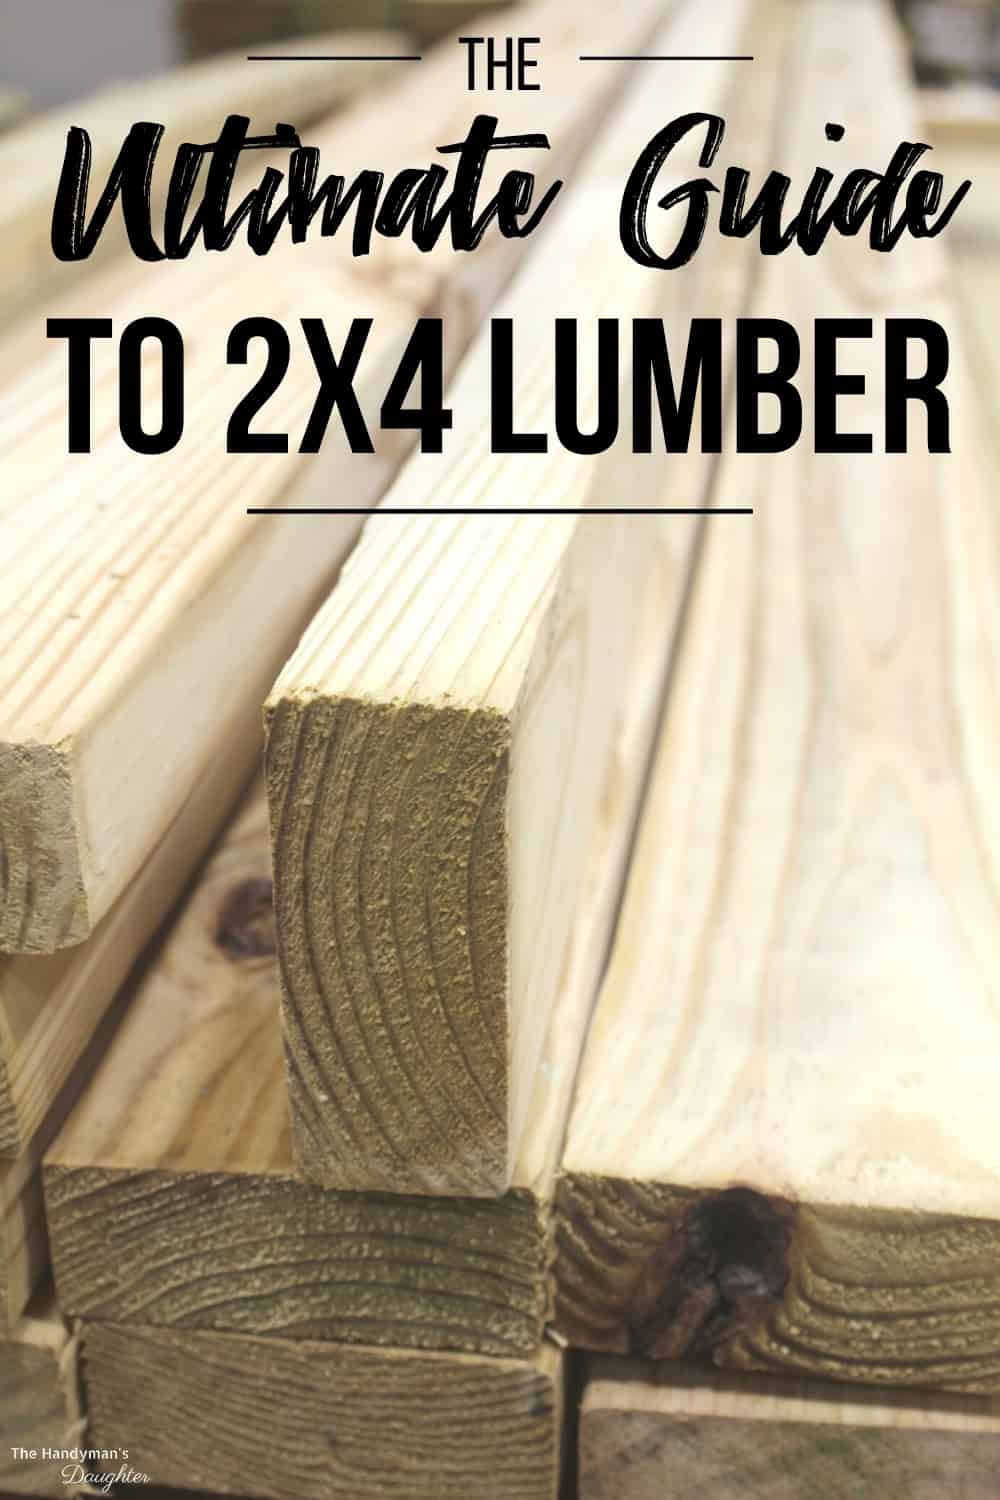 The Ultimate Guide to 2x4 Lumber